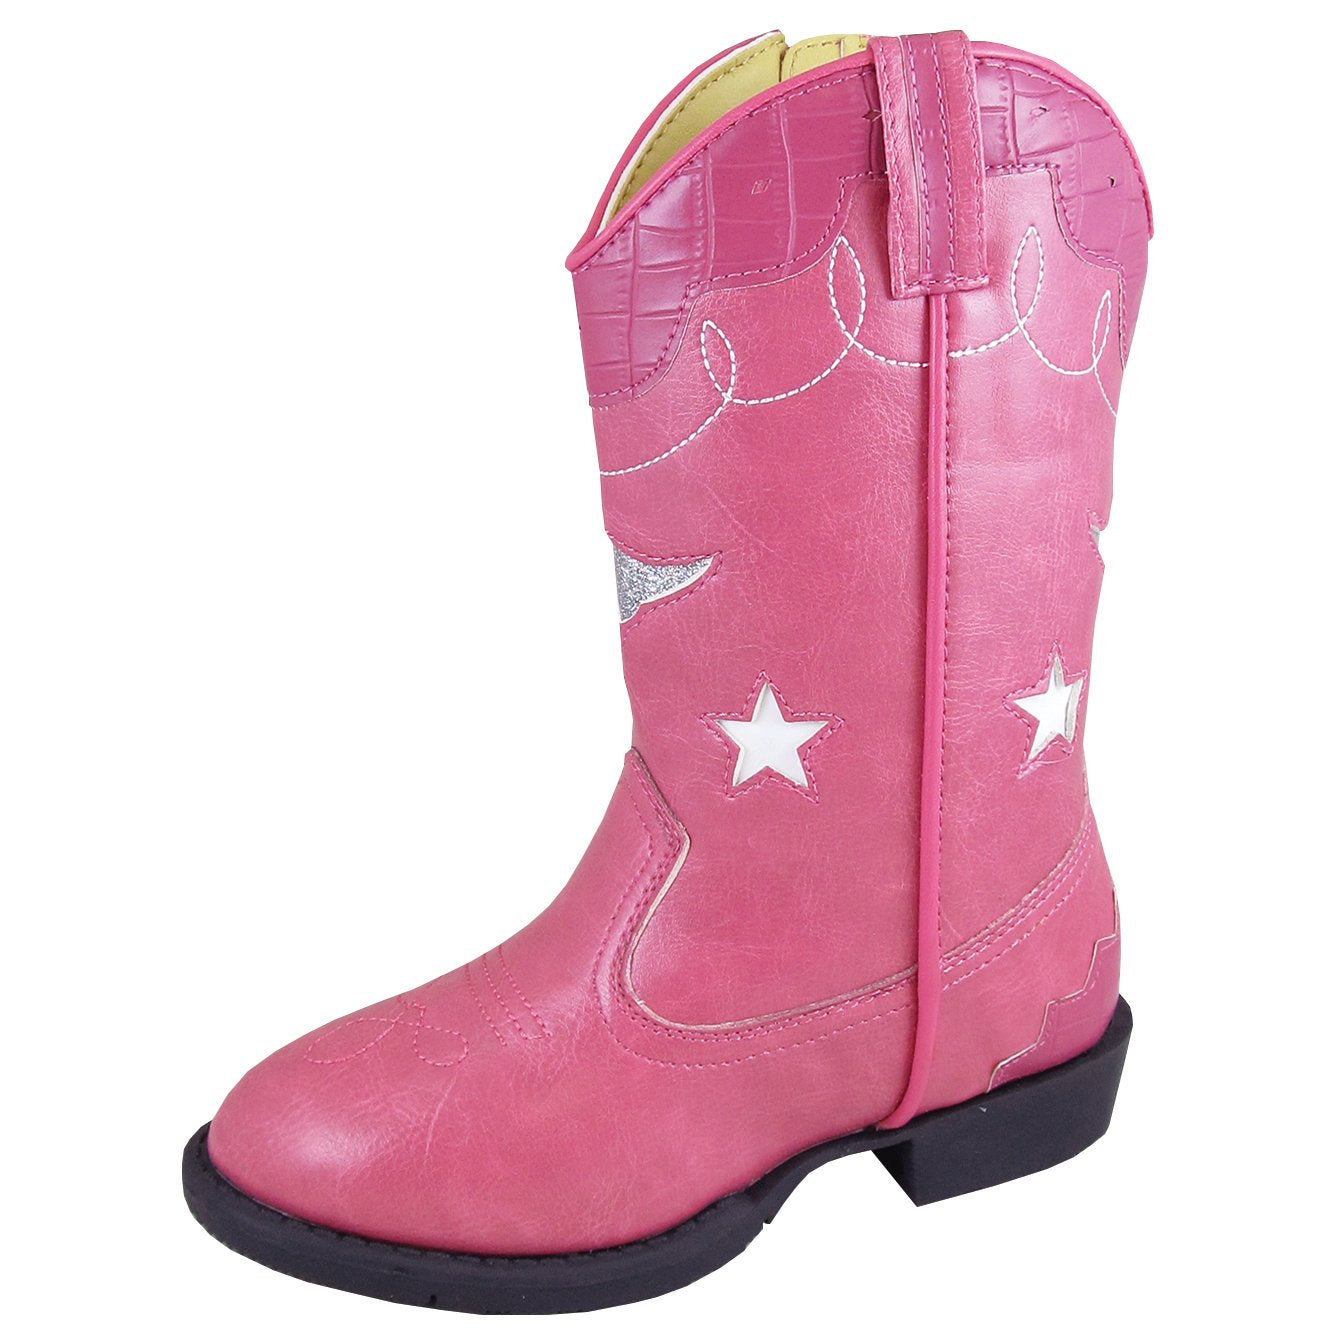 Smoky Mountain Girl's Children's Pink Western With Lights